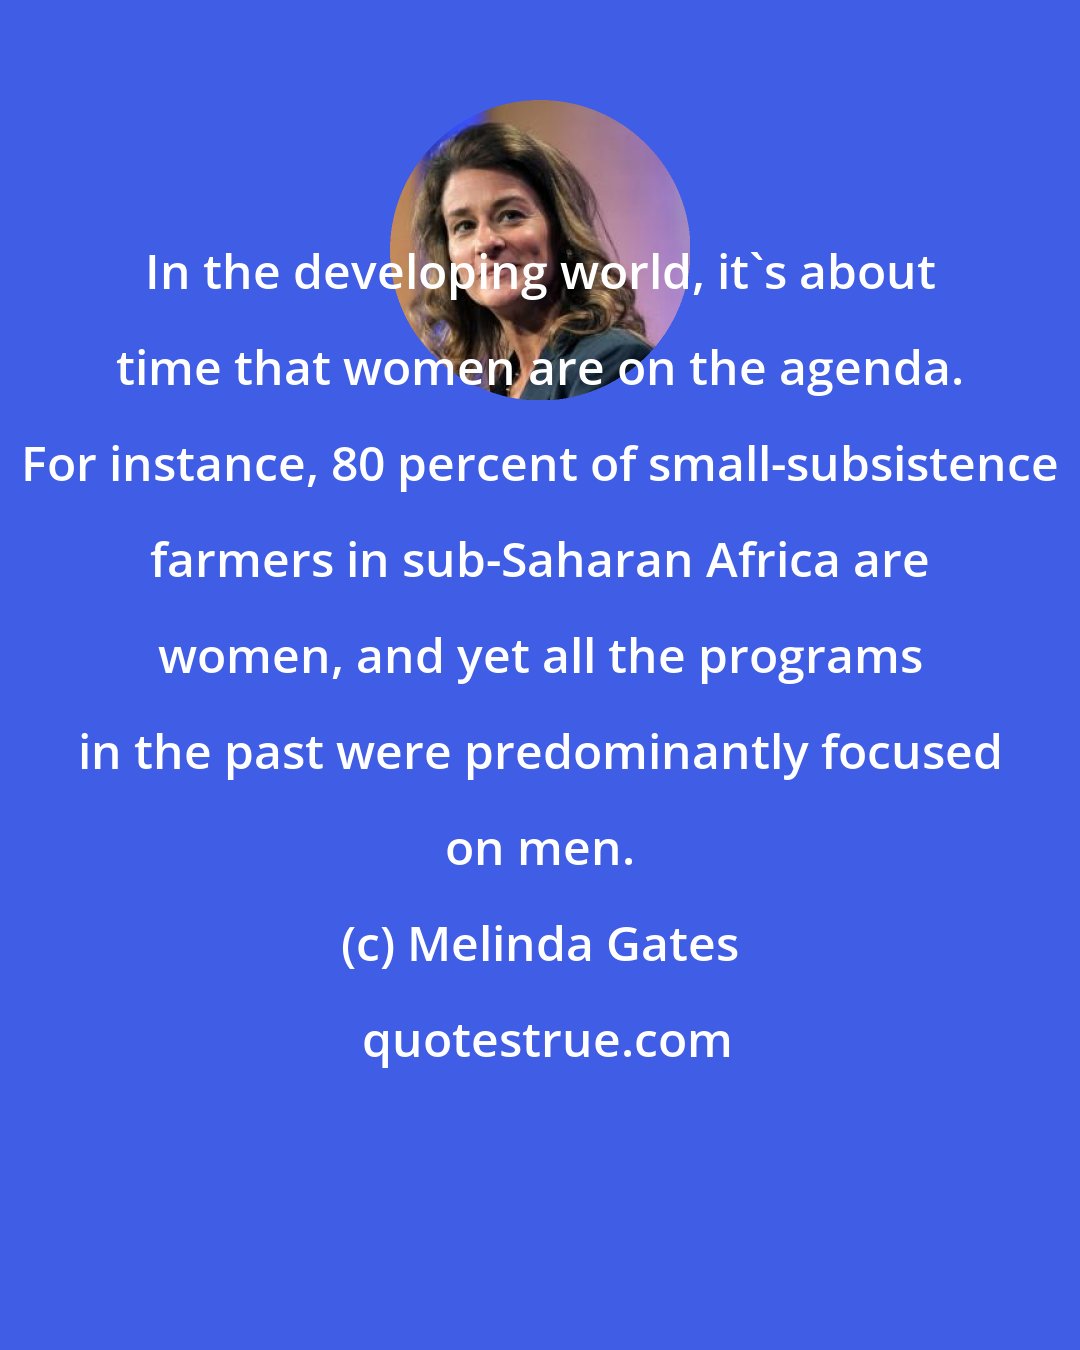 Melinda Gates: In the developing world, it's about time that women are on the agenda. For instance, 80 percent of small-subsistence farmers in sub-Saharan Africa are women, and yet all the programs in the past were predominantly focused on men.